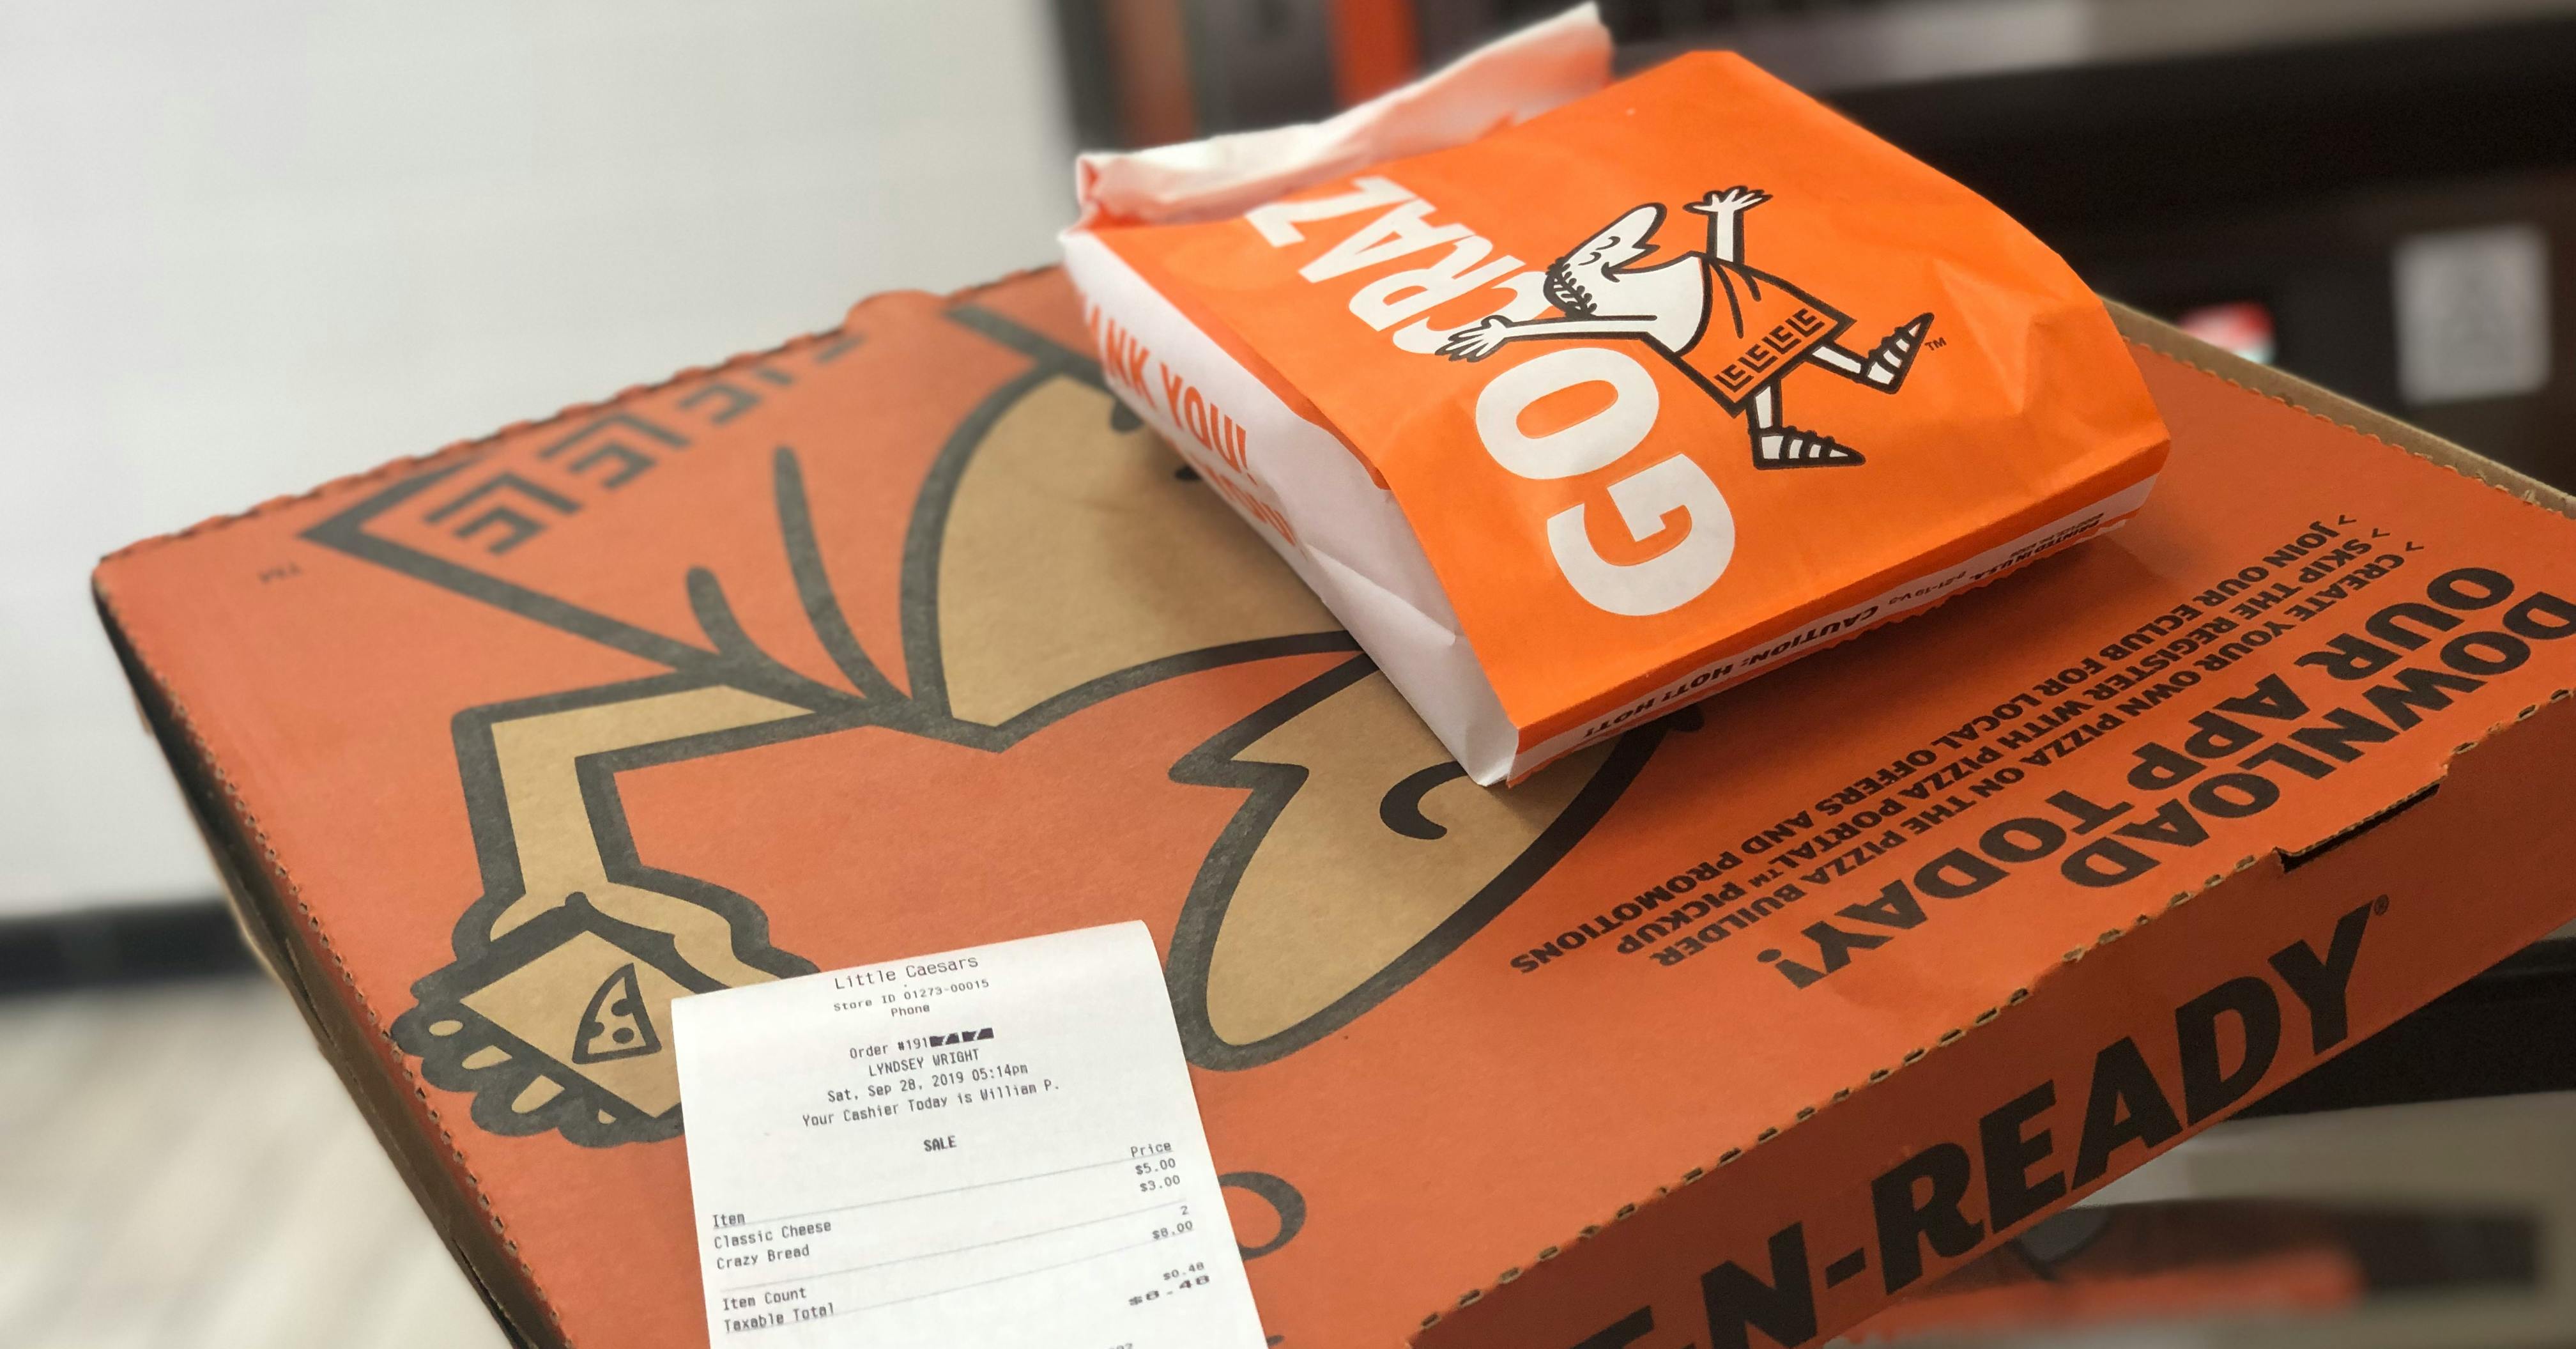 17 Genius Tips to Get Little Caesars Deals and Coupons